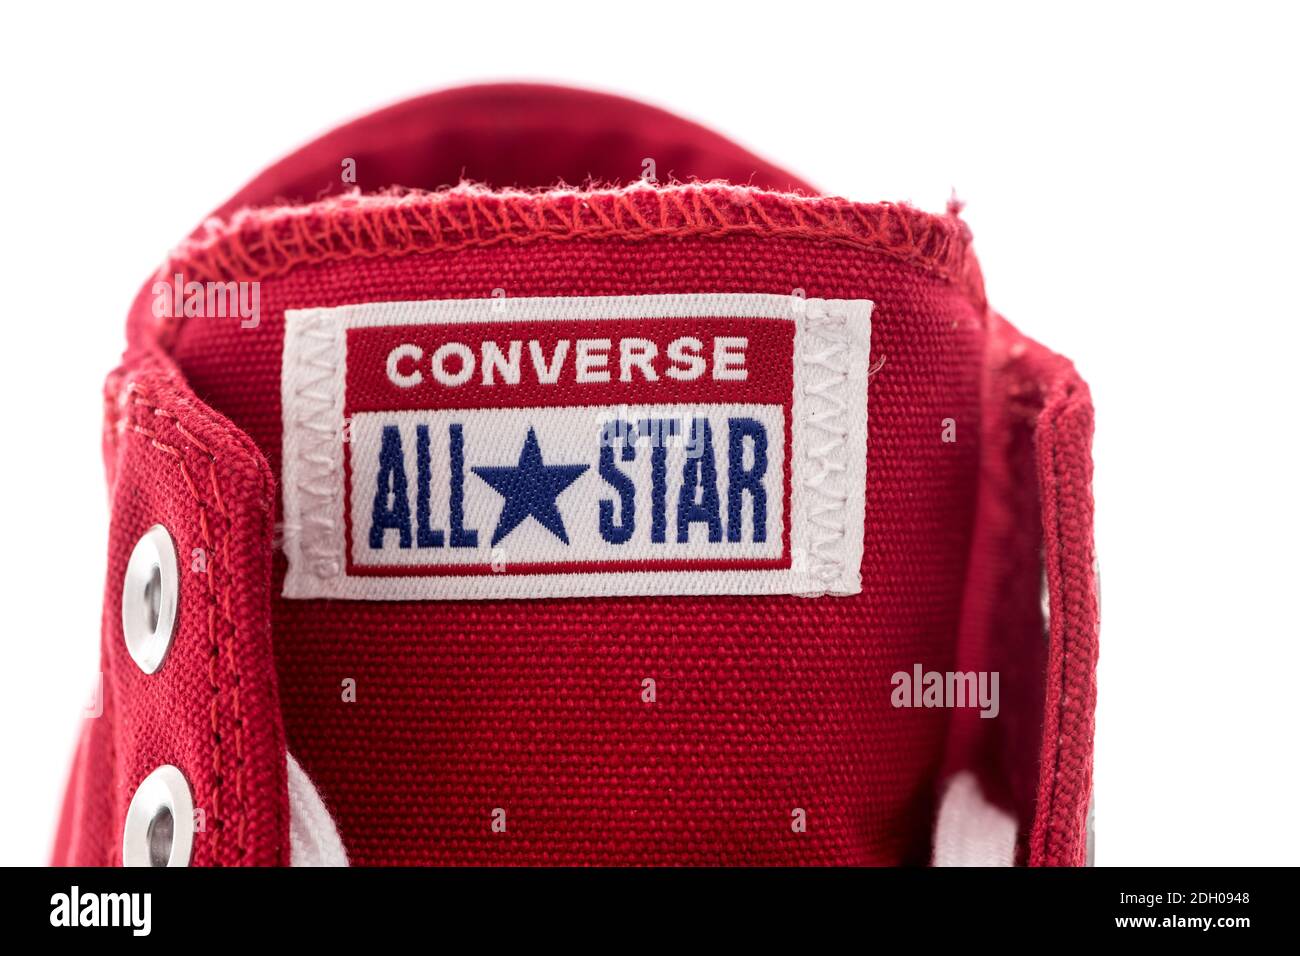 Converse All Star Logo High Resolution Stock Photography and Images - Alamy